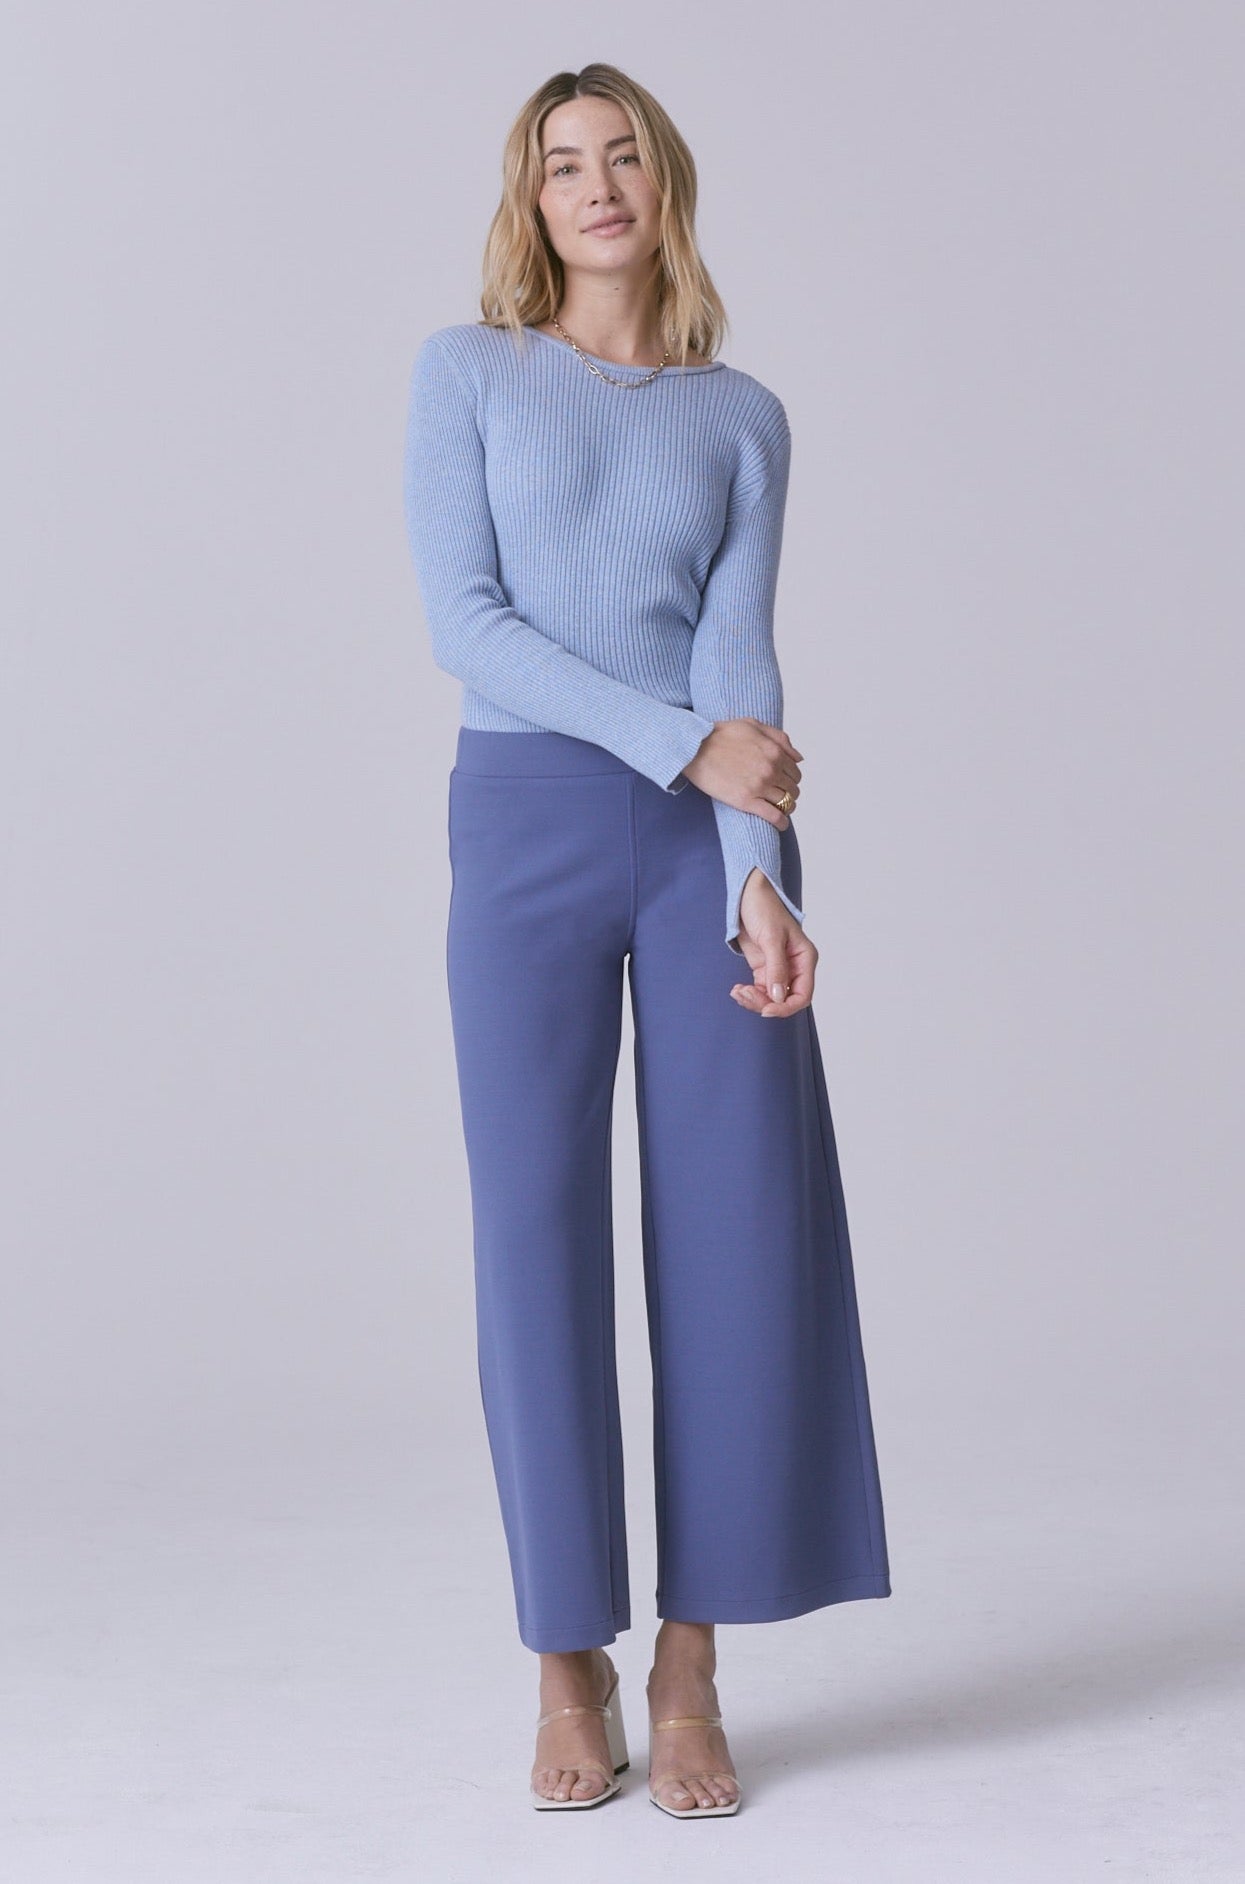 The Knit Wide Leg in Cirrus Crepe